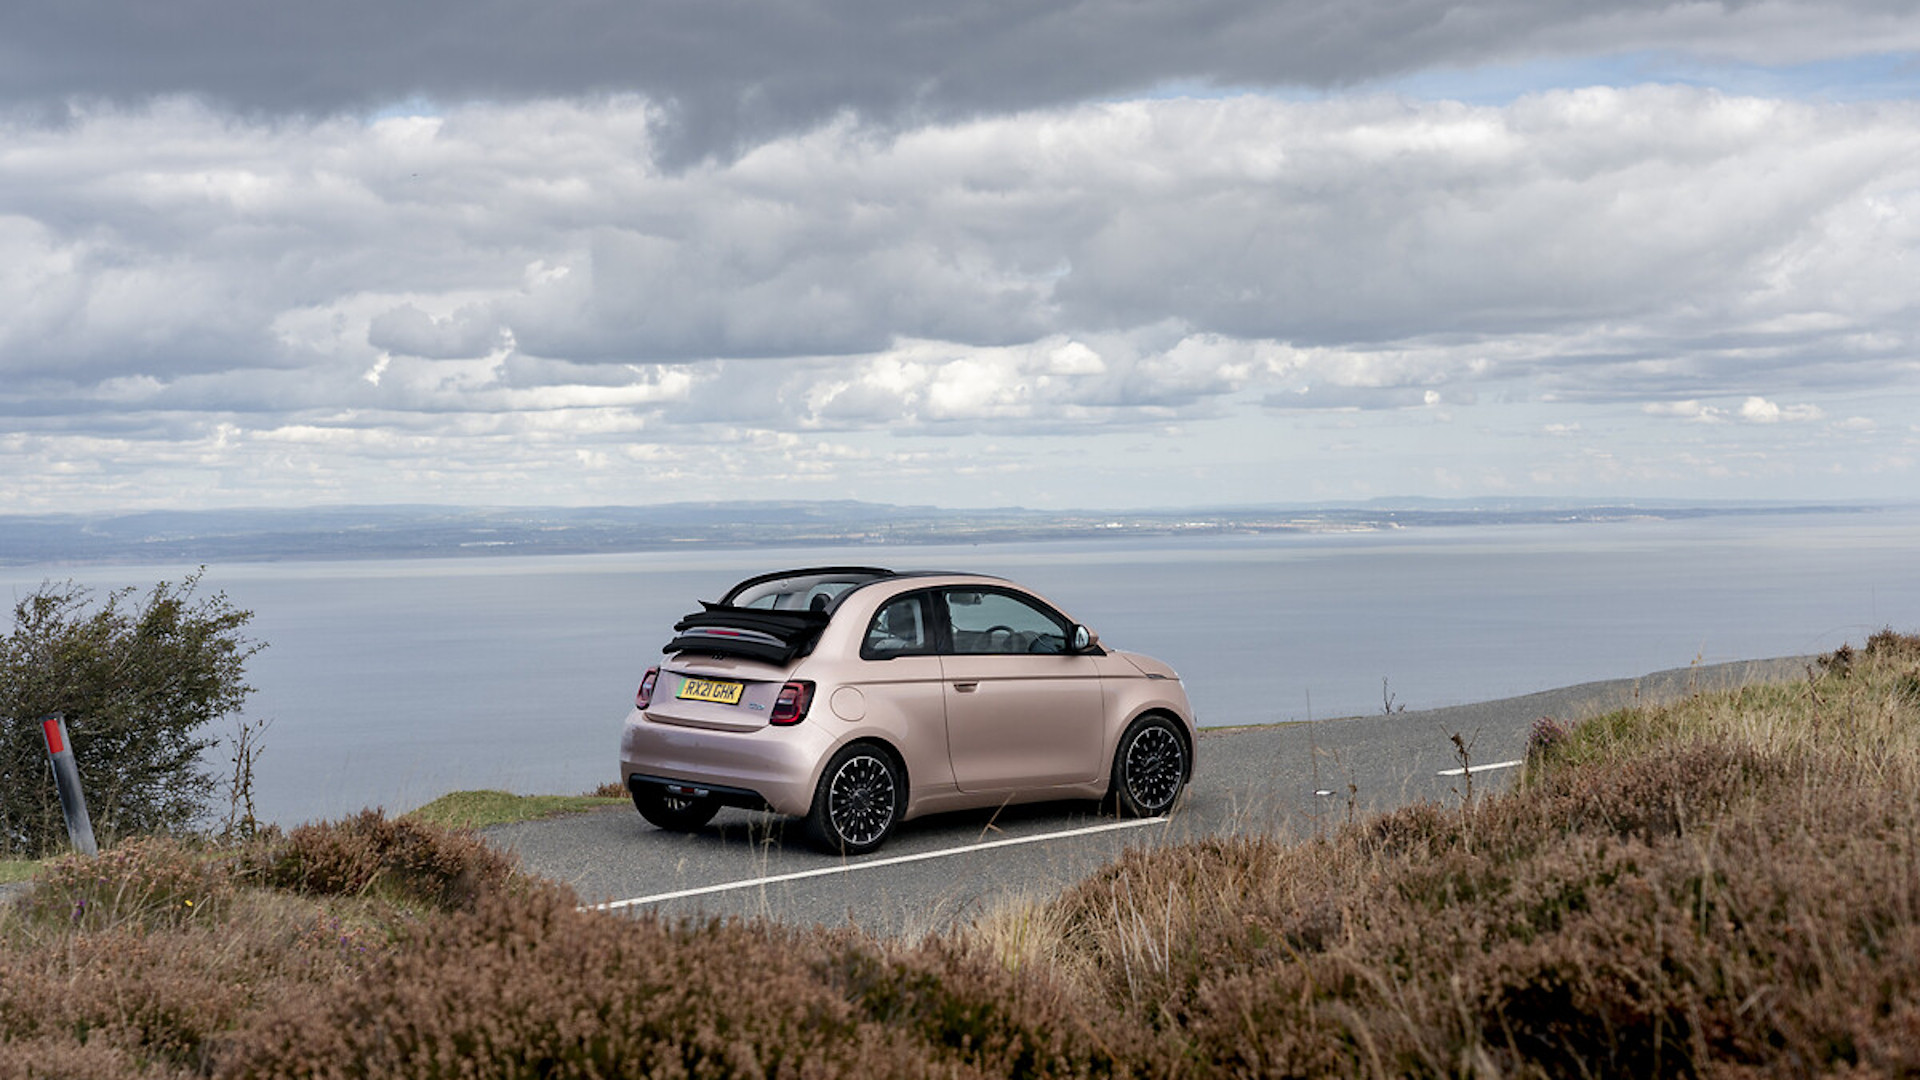 Fiat reveal the 10 most scenic driving routes across the UK